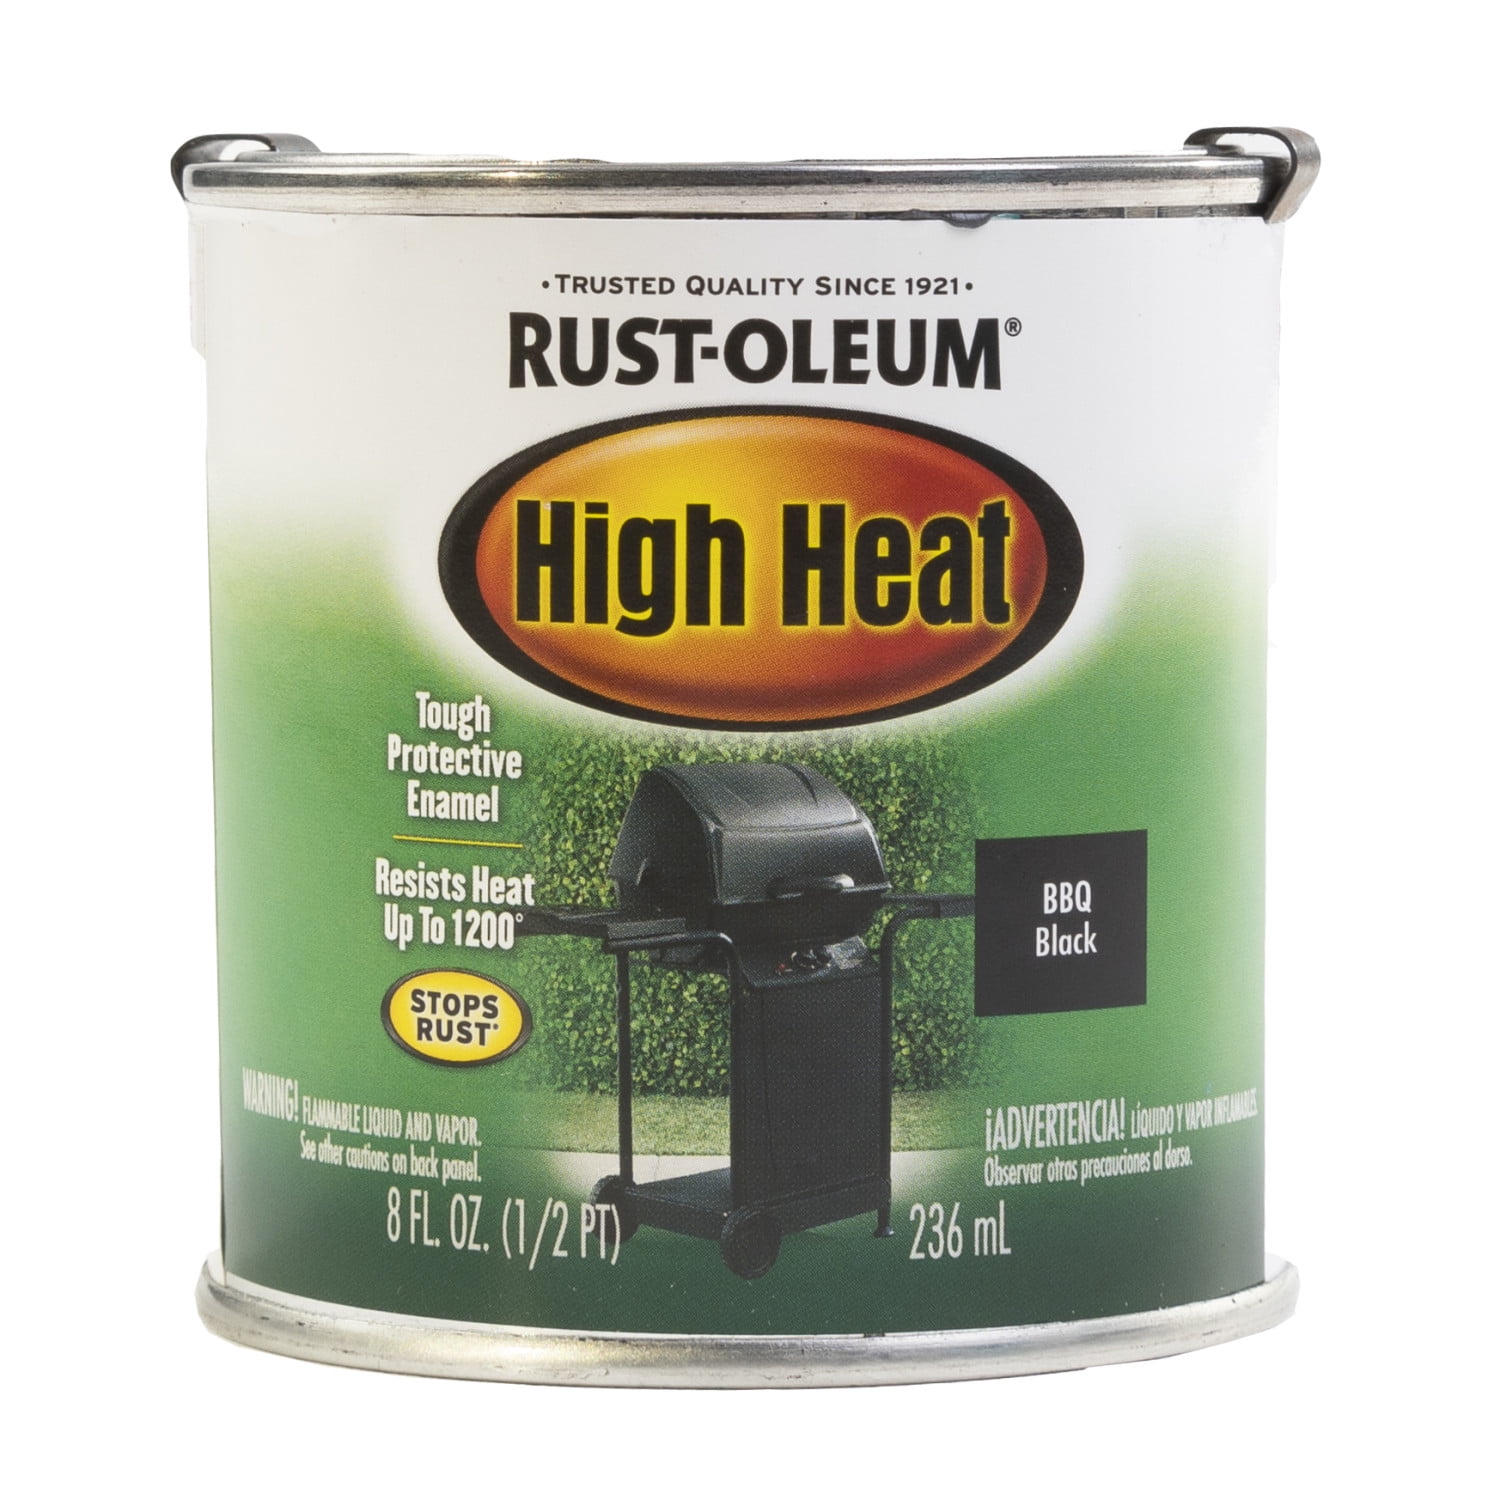 Rust Oleum Paints Stains High Heat Tough Protective Enamel Is Perfect For Grills Or Firepits 1 2 Pint 8 Oz Bbq Black Walmart Com